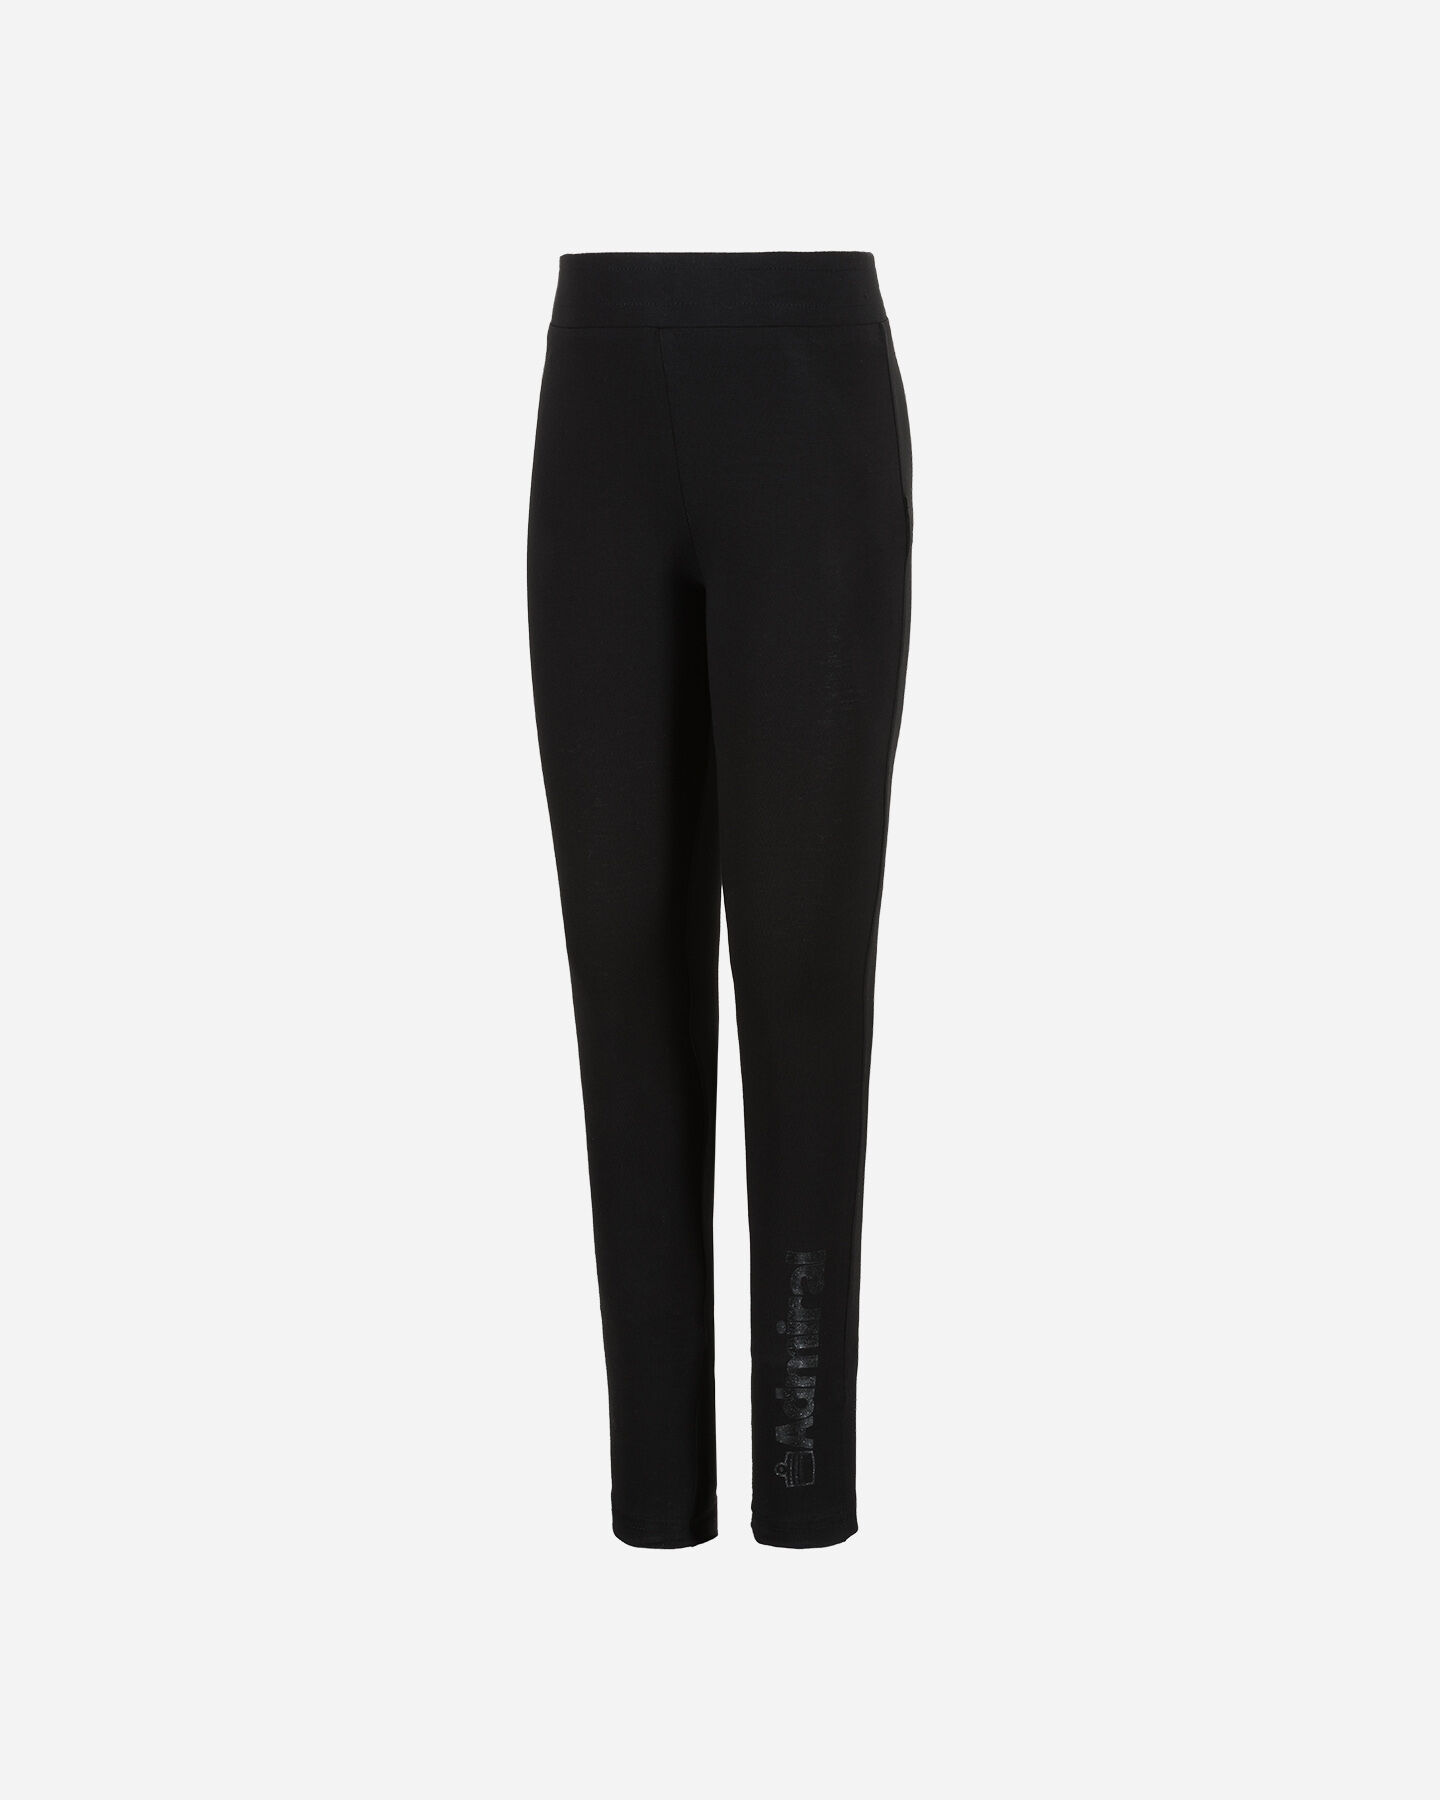  Leggings ADMIRAL JSTRETCH JR S4075514|050|4A scatto 0